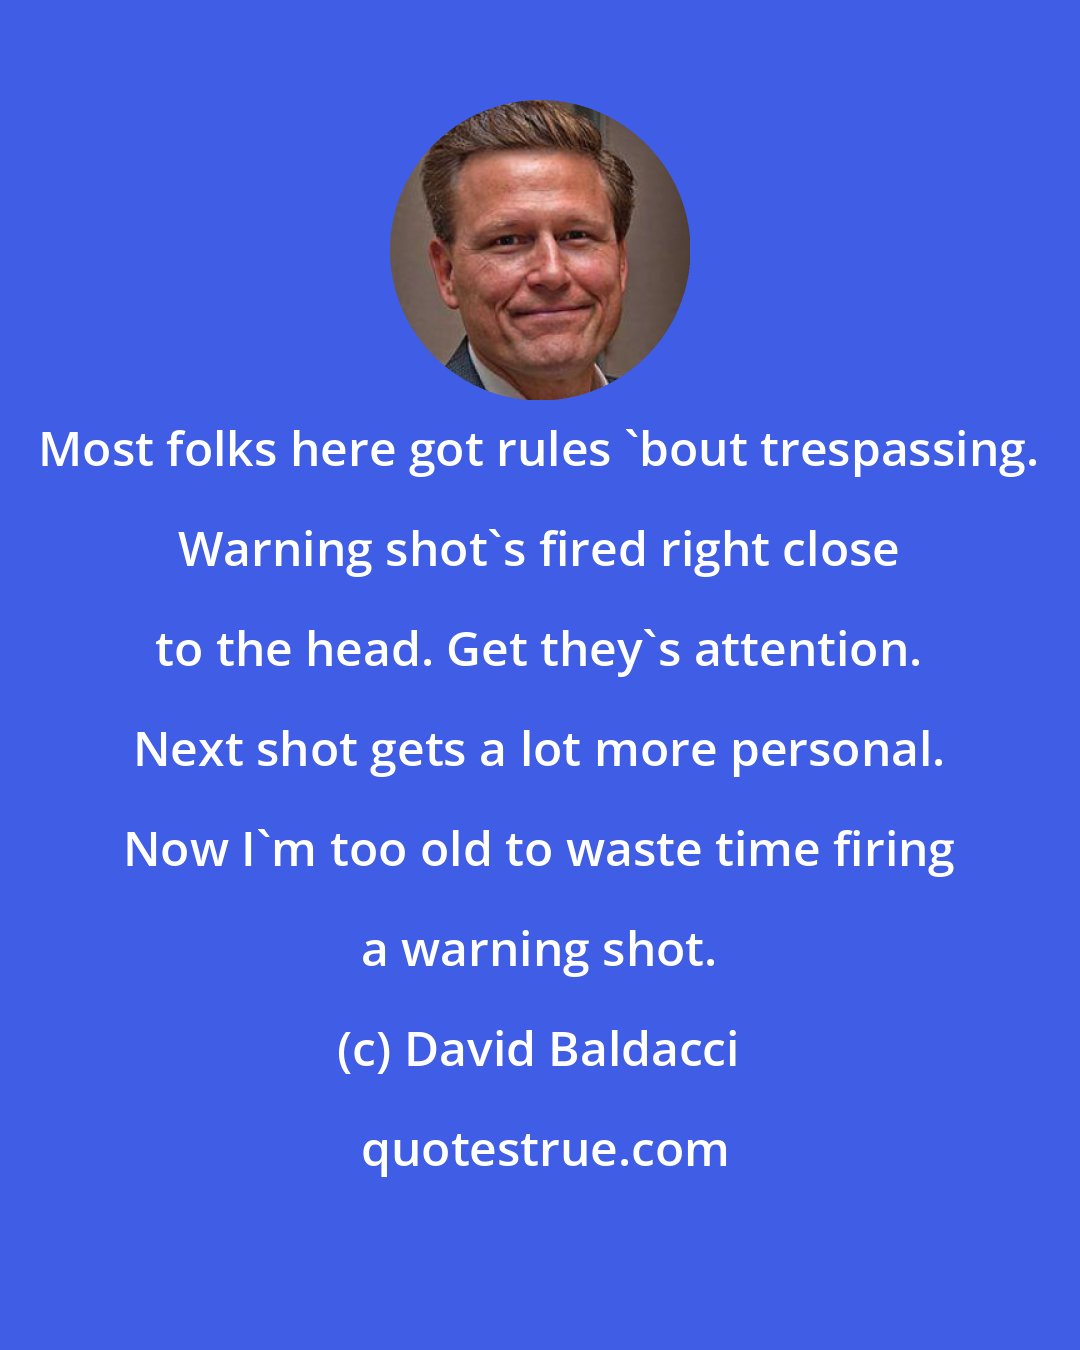 David Baldacci: Most folks here got rules 'bout trespassing. Warning shot's fired right close to the head. Get they's attention. Next shot gets a lot more personal. Now I'm too old to waste time firing a warning shot.